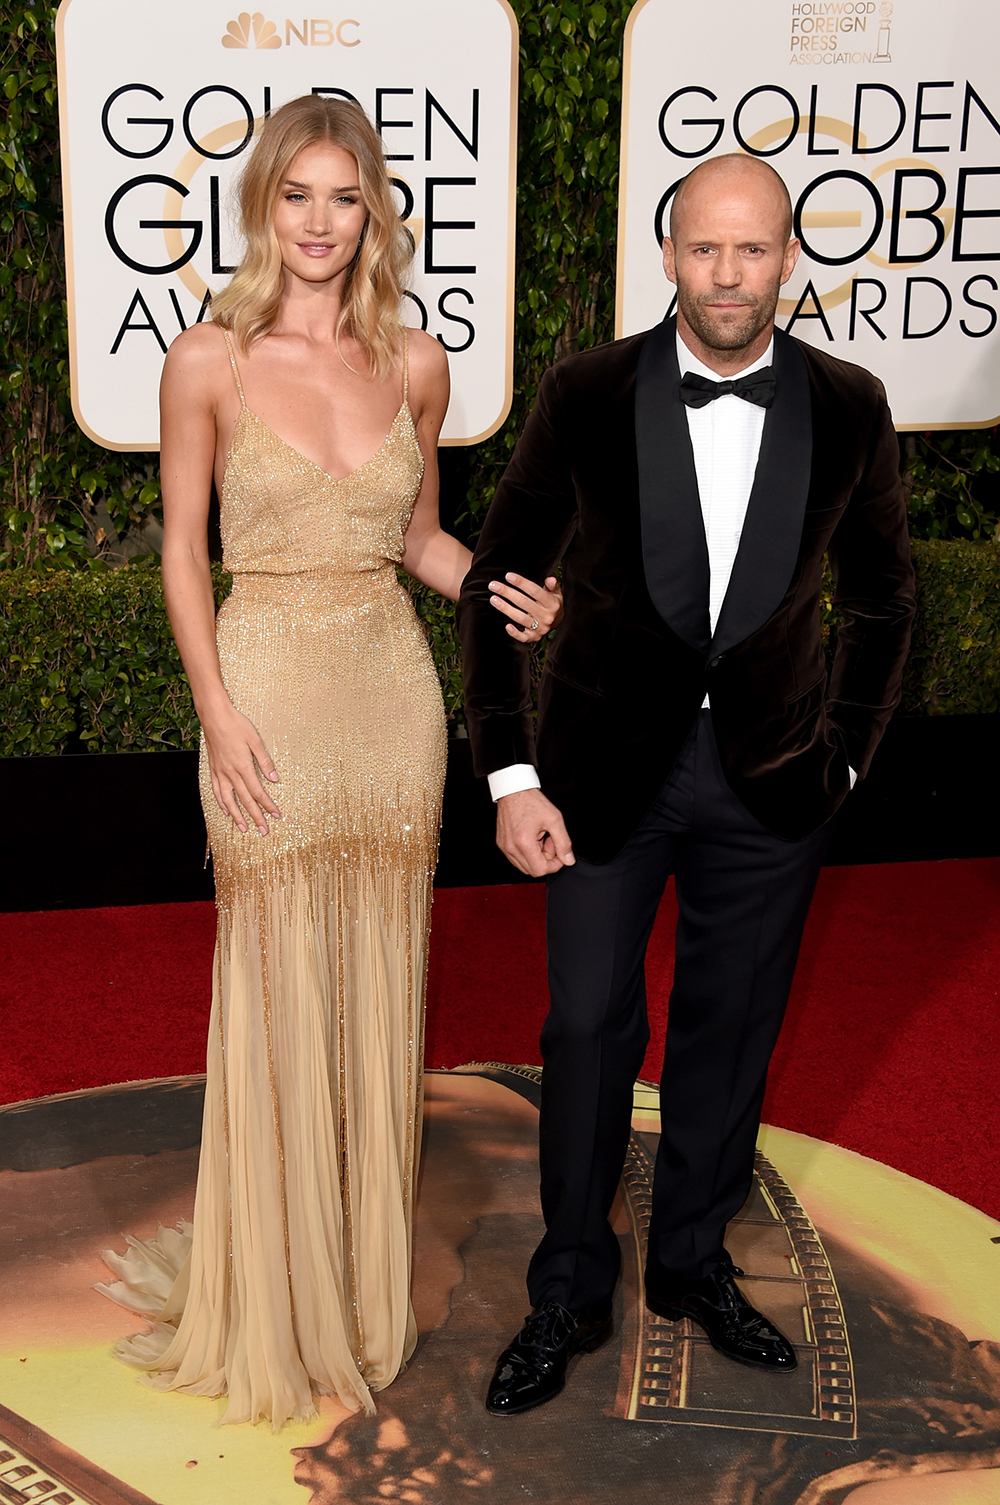 ROSIE HUNTINGTON-WHITELEY AND JASON STATHAM Observant magpies were quick to spot the sparkler on Huntington-Whiteley's hand as she walked the Golden Globes red carpet with her long-term love, Jason Statham.